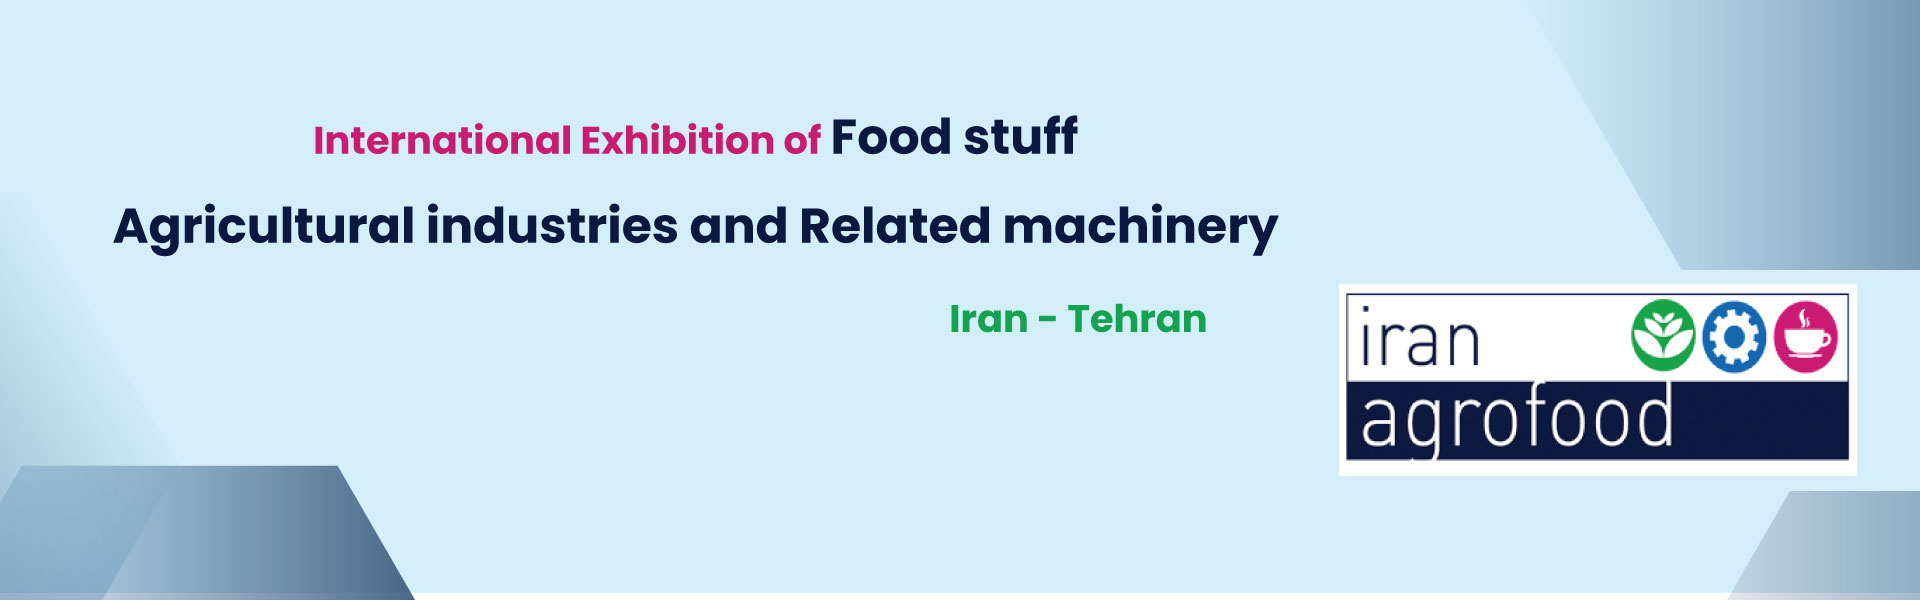 Food stuff, agricultural industries and related machinery Exhibition of Iran Tehran (Iran Agrofood)